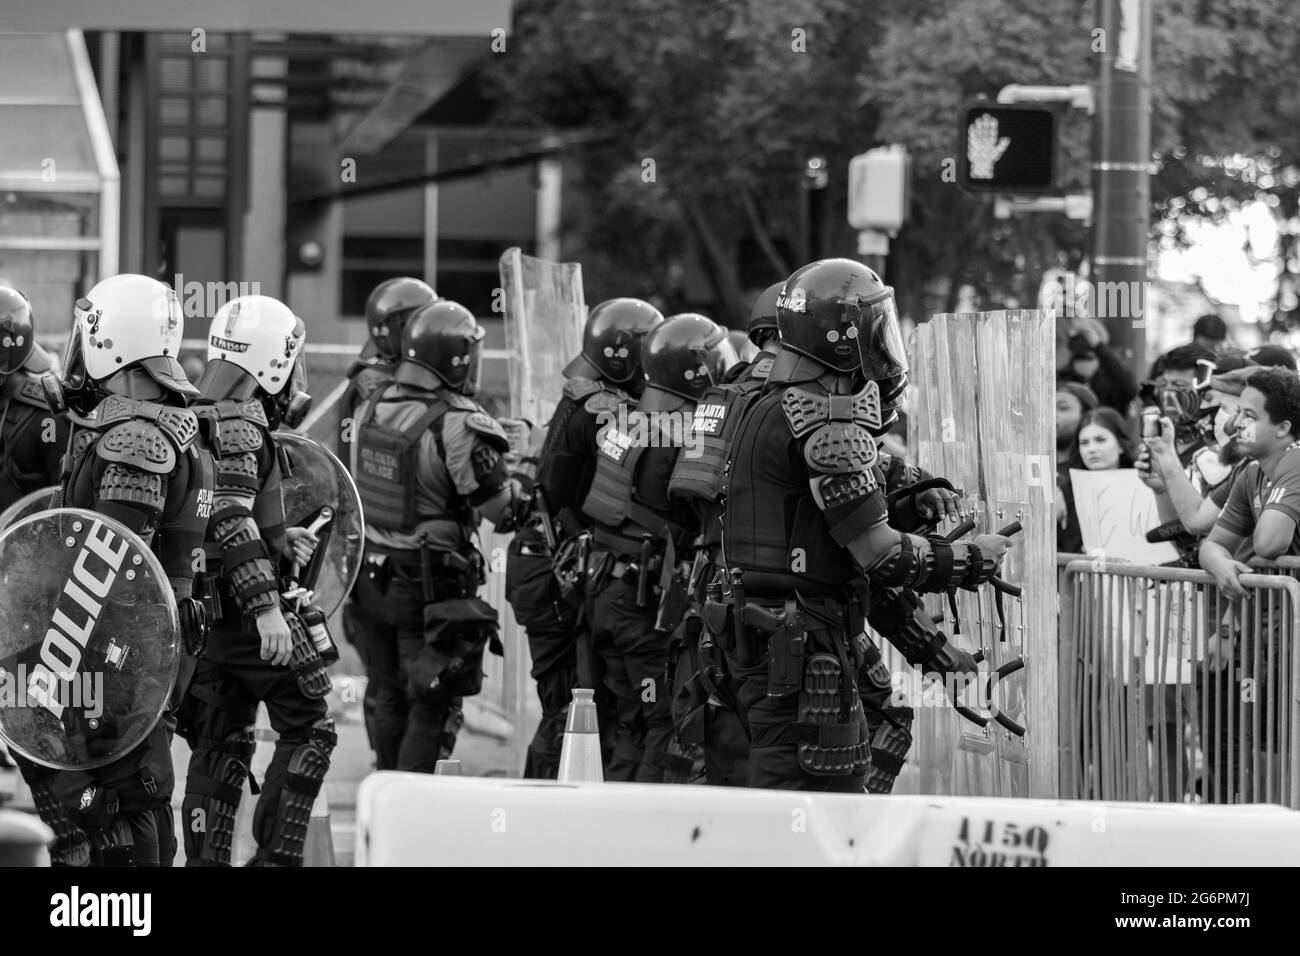 Police in riot gear. Stock Photo